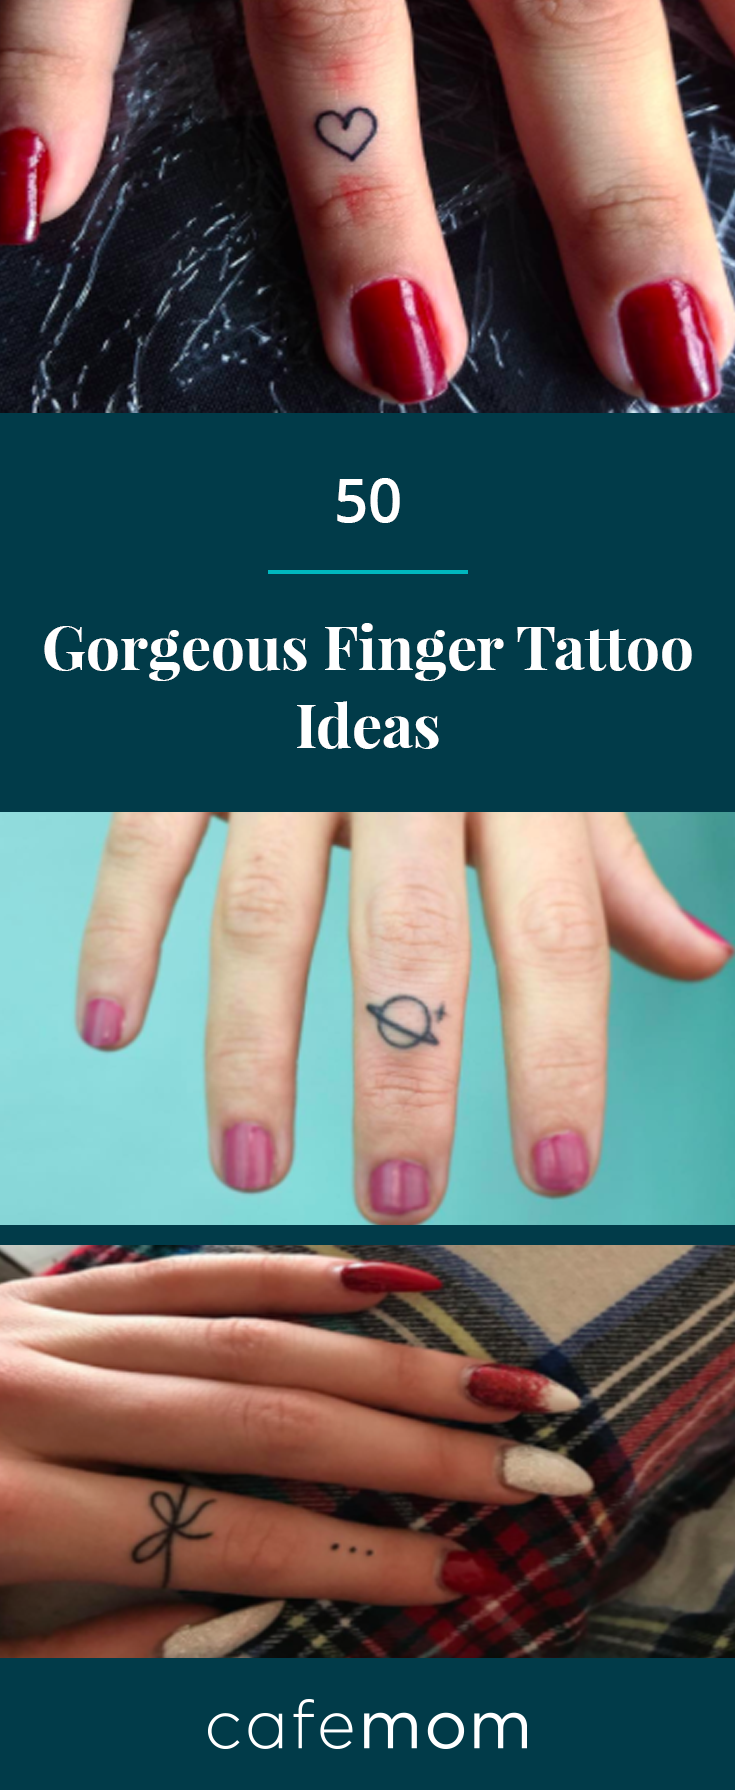 Adorn Your Fingers With These Chic Finger Tattoos  Fashionisers